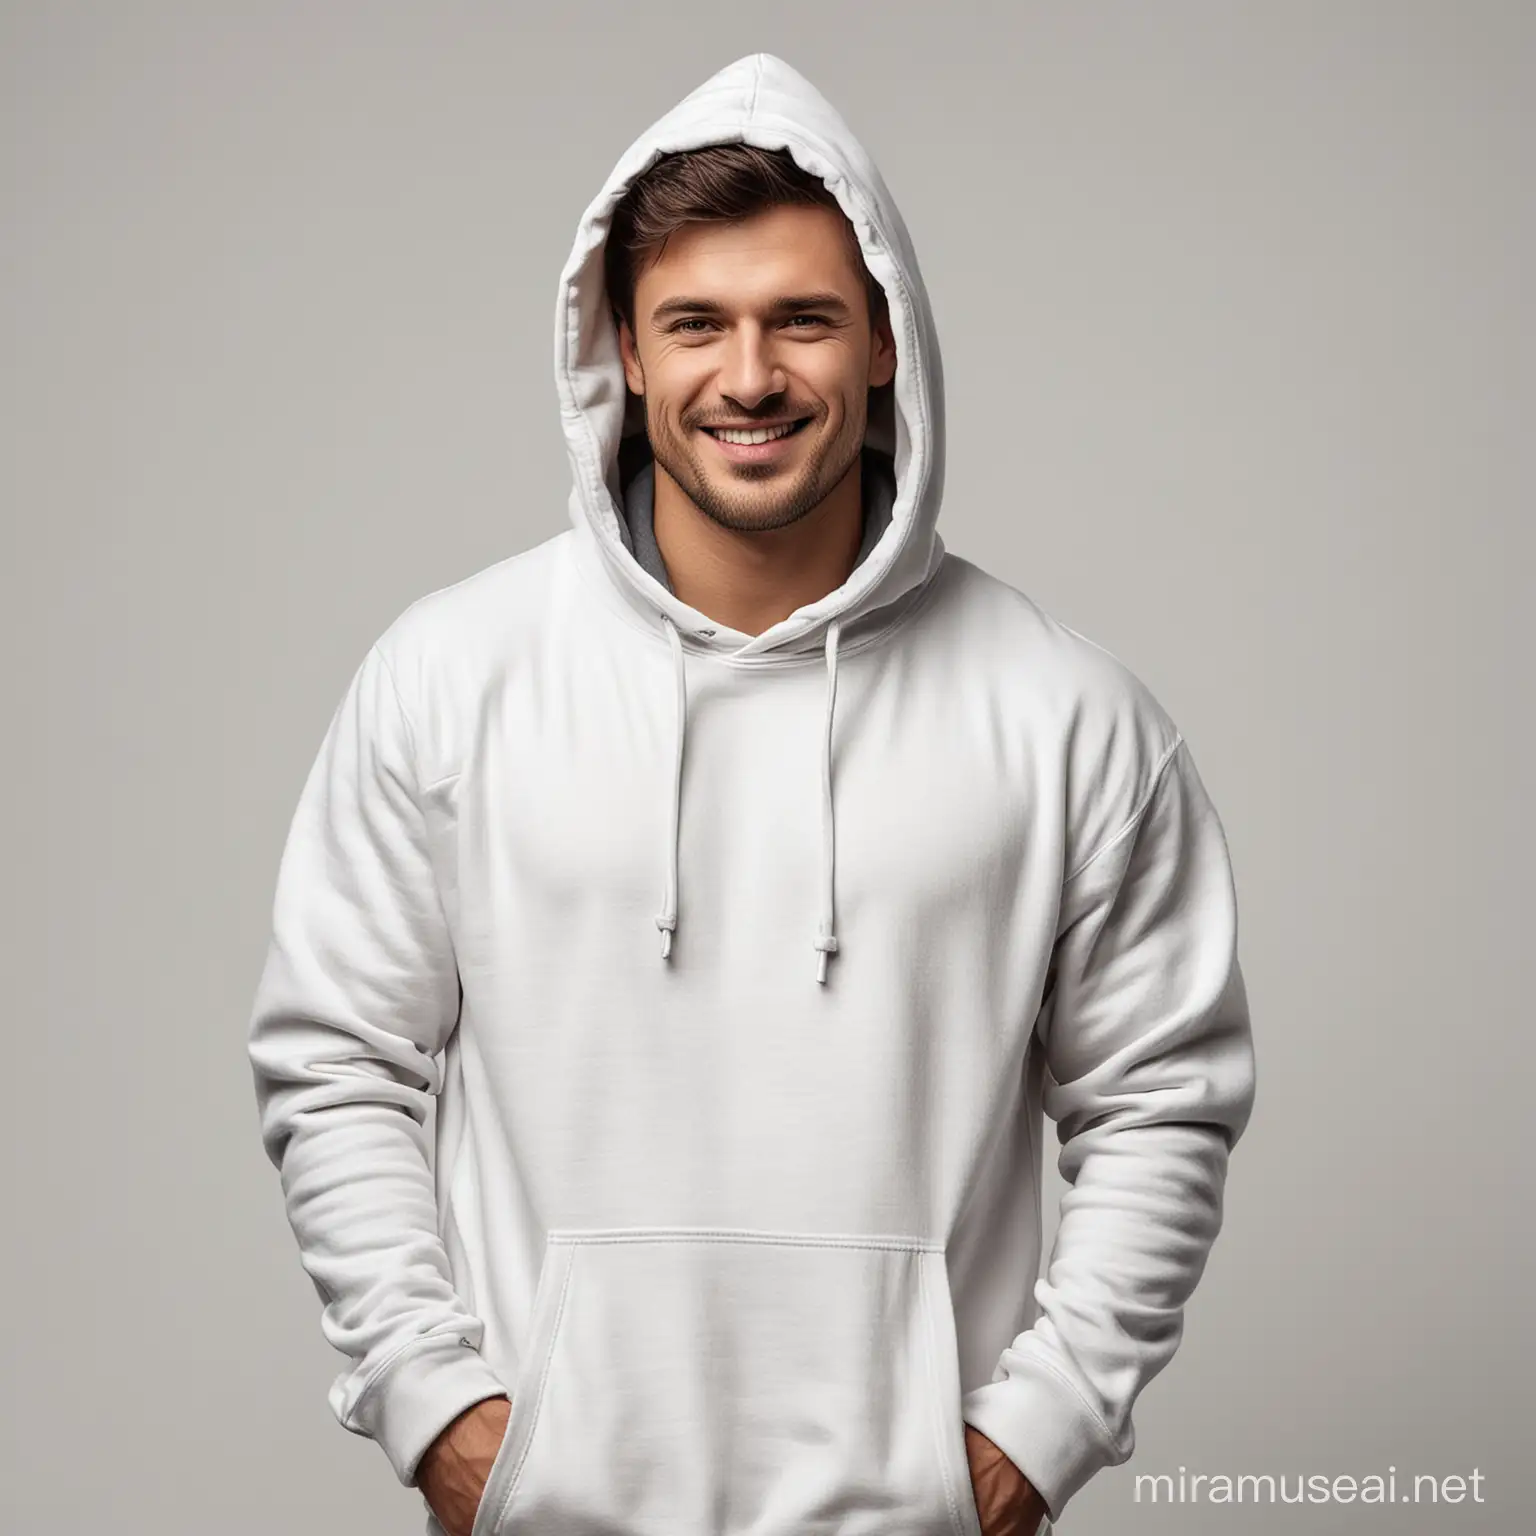 A man wearing a Hooded Sweatshirt, posing and happy, photographic background white